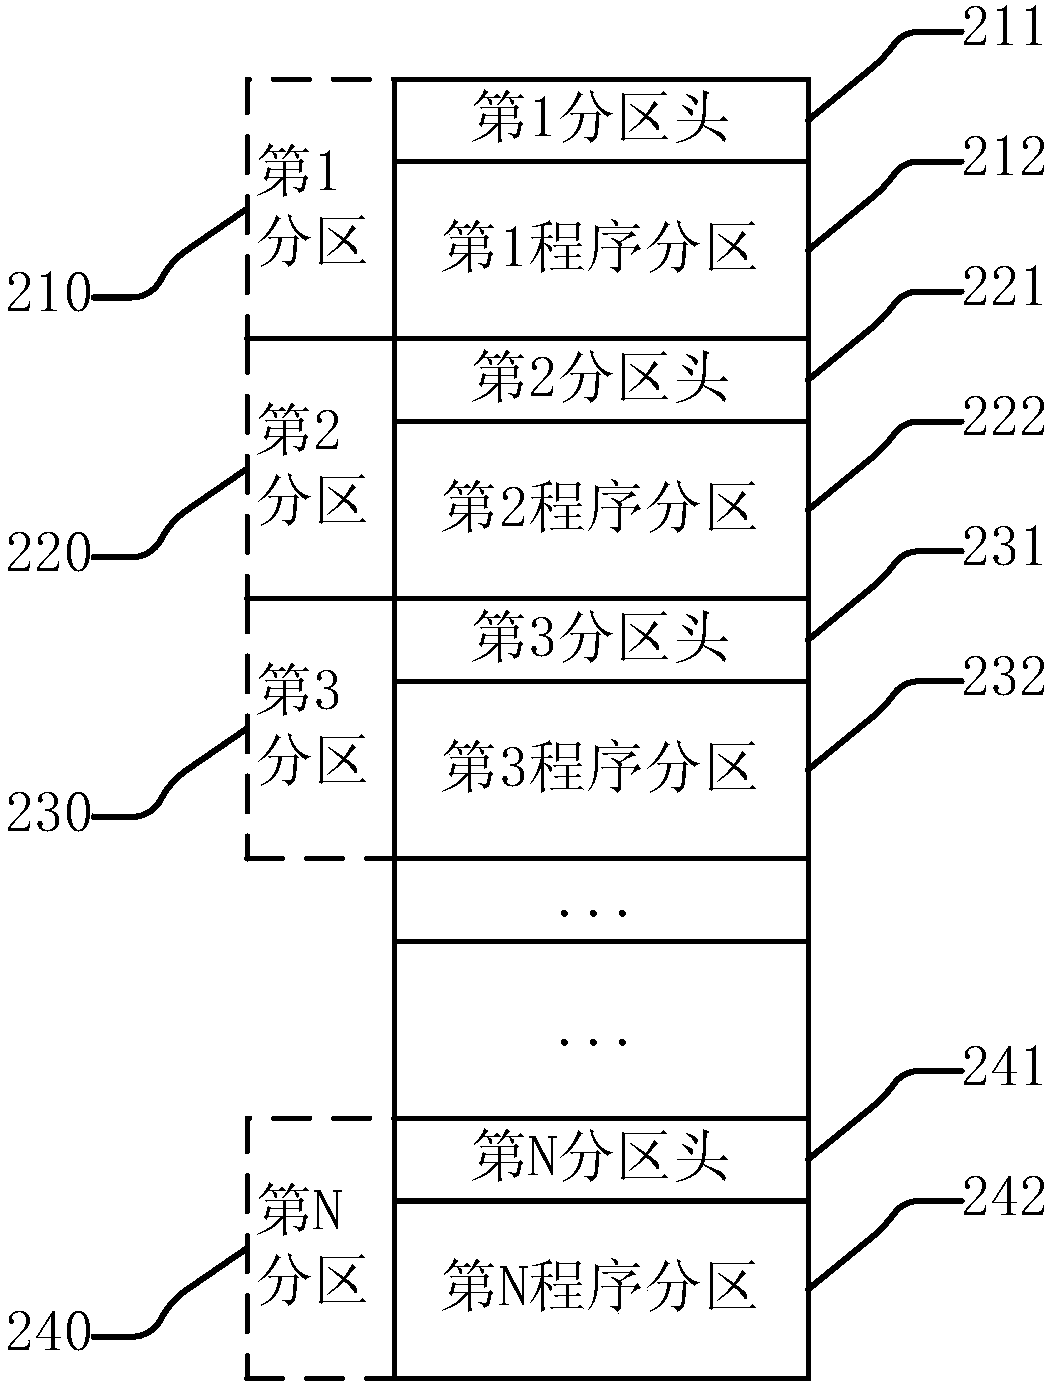 A software upgrading method and device